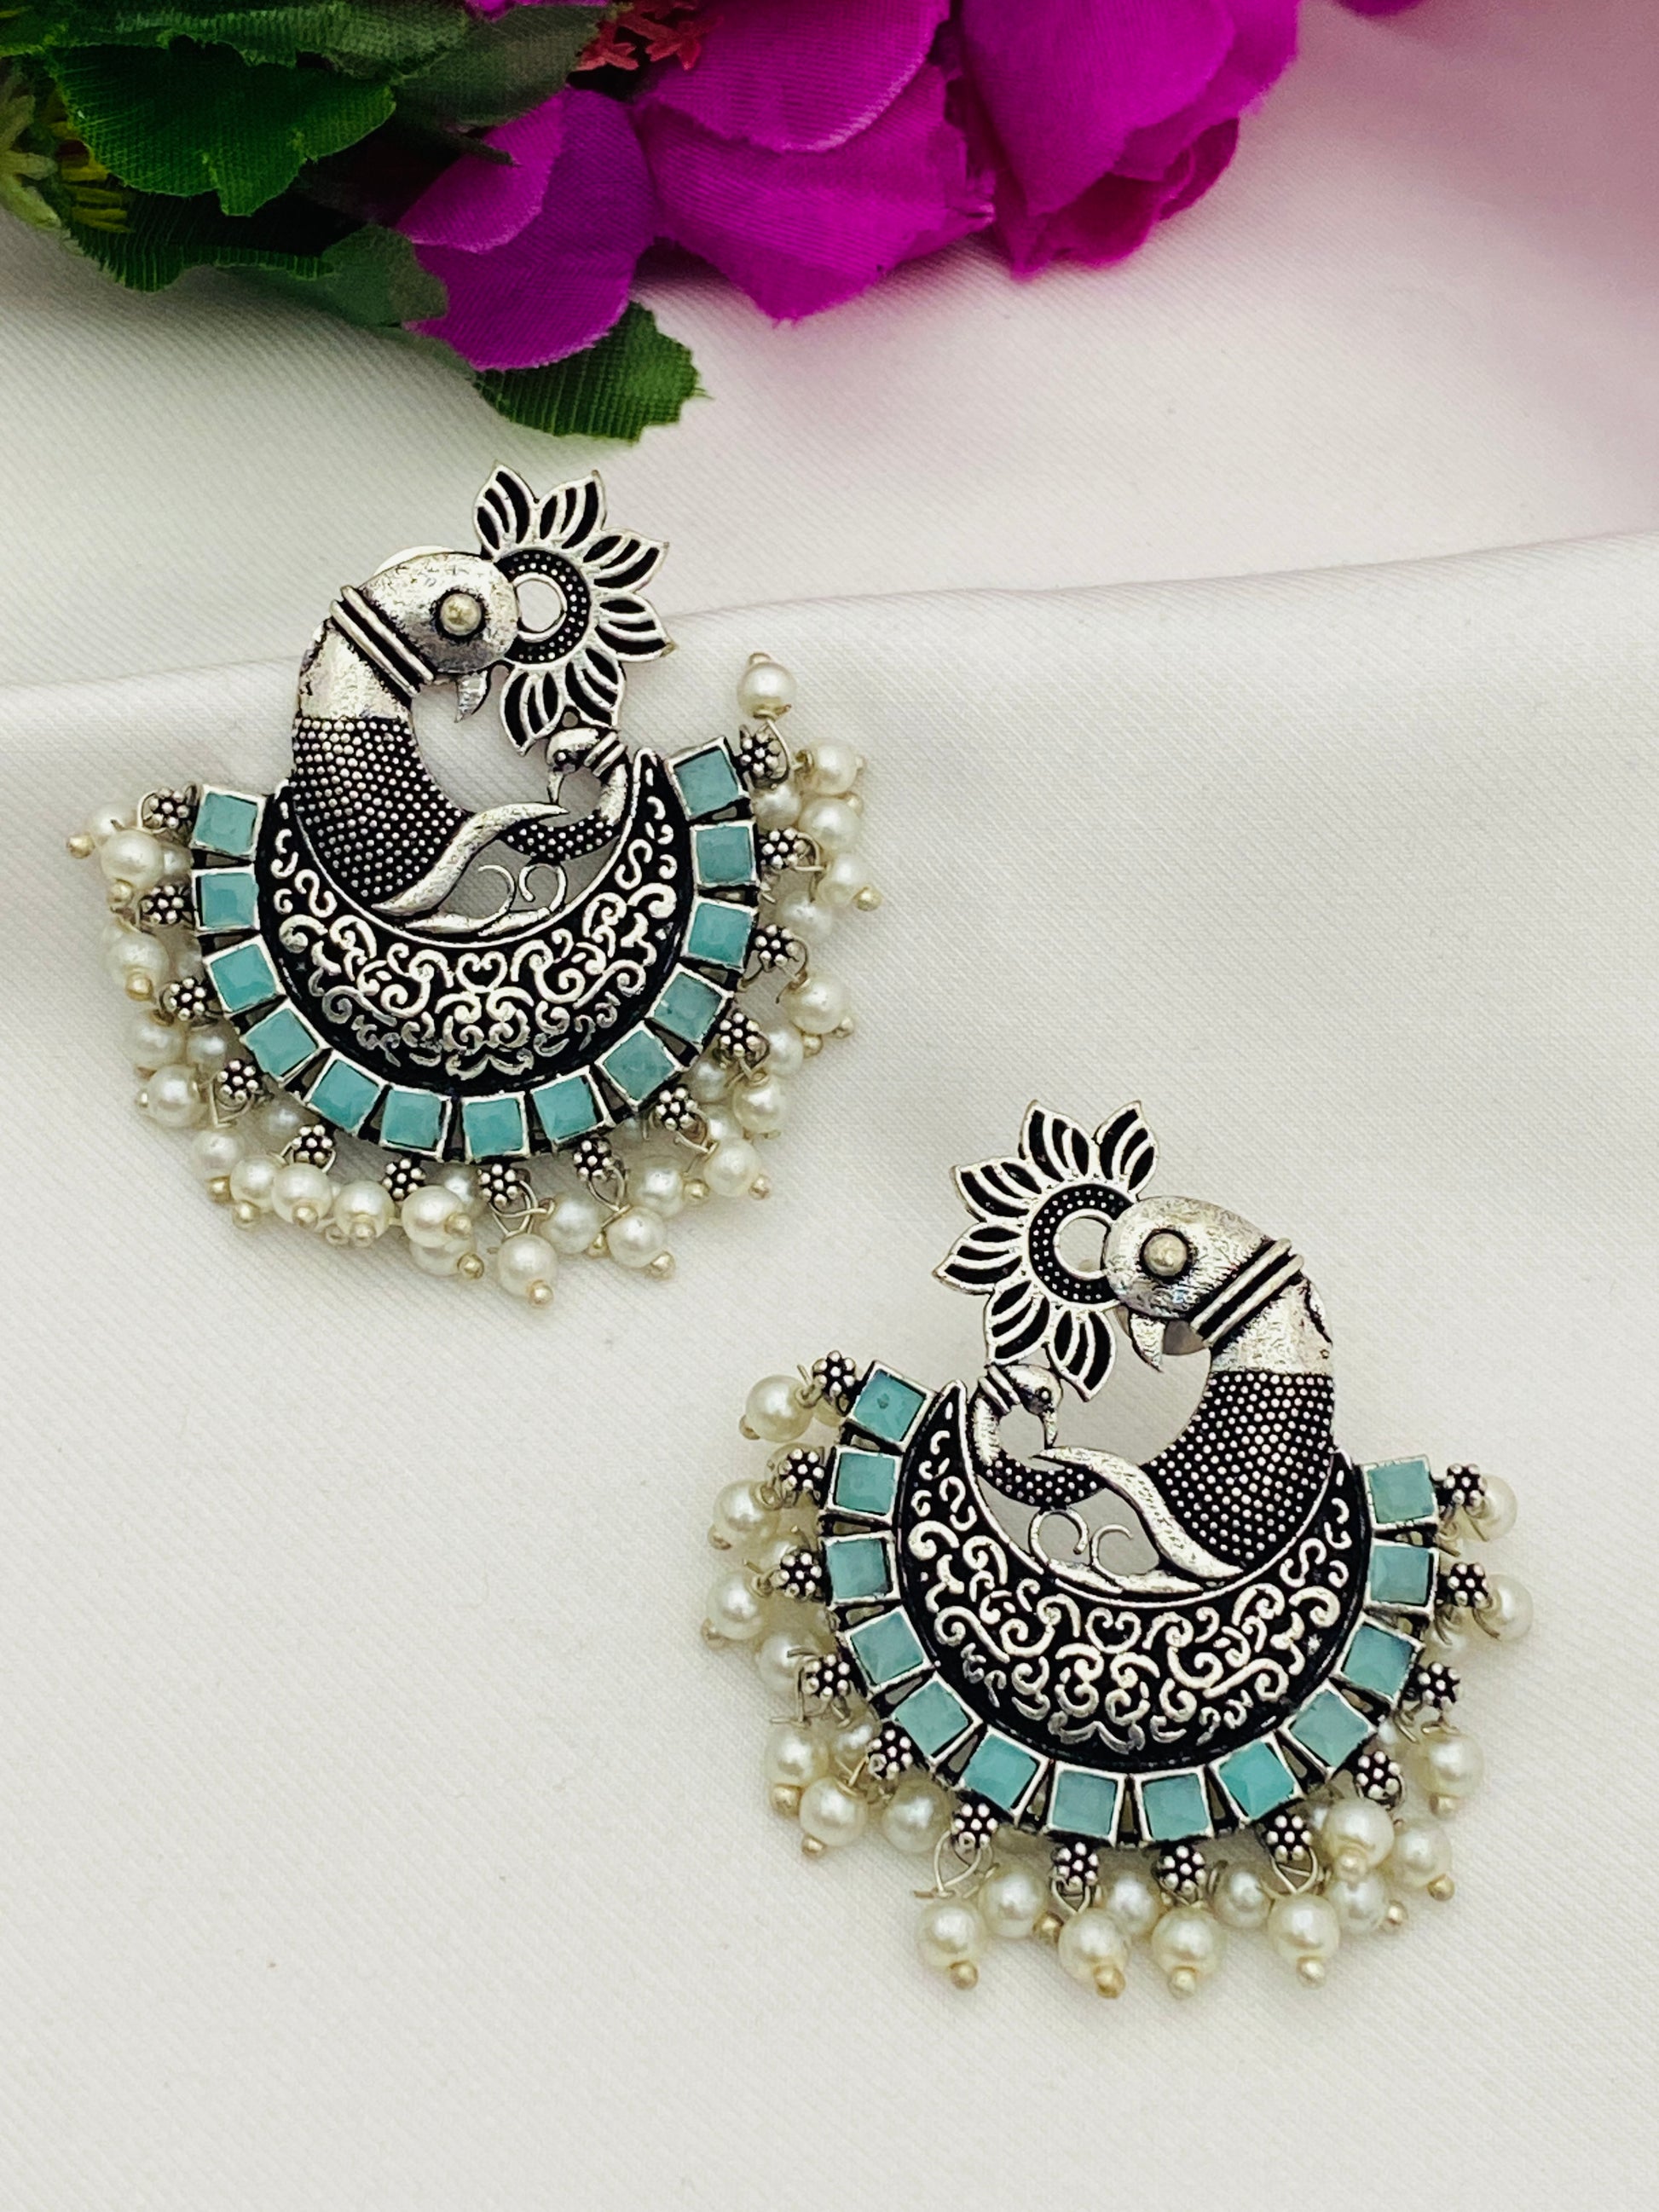  Peacock Designed Silver Toned Oxidized Earrings in Apache Junction